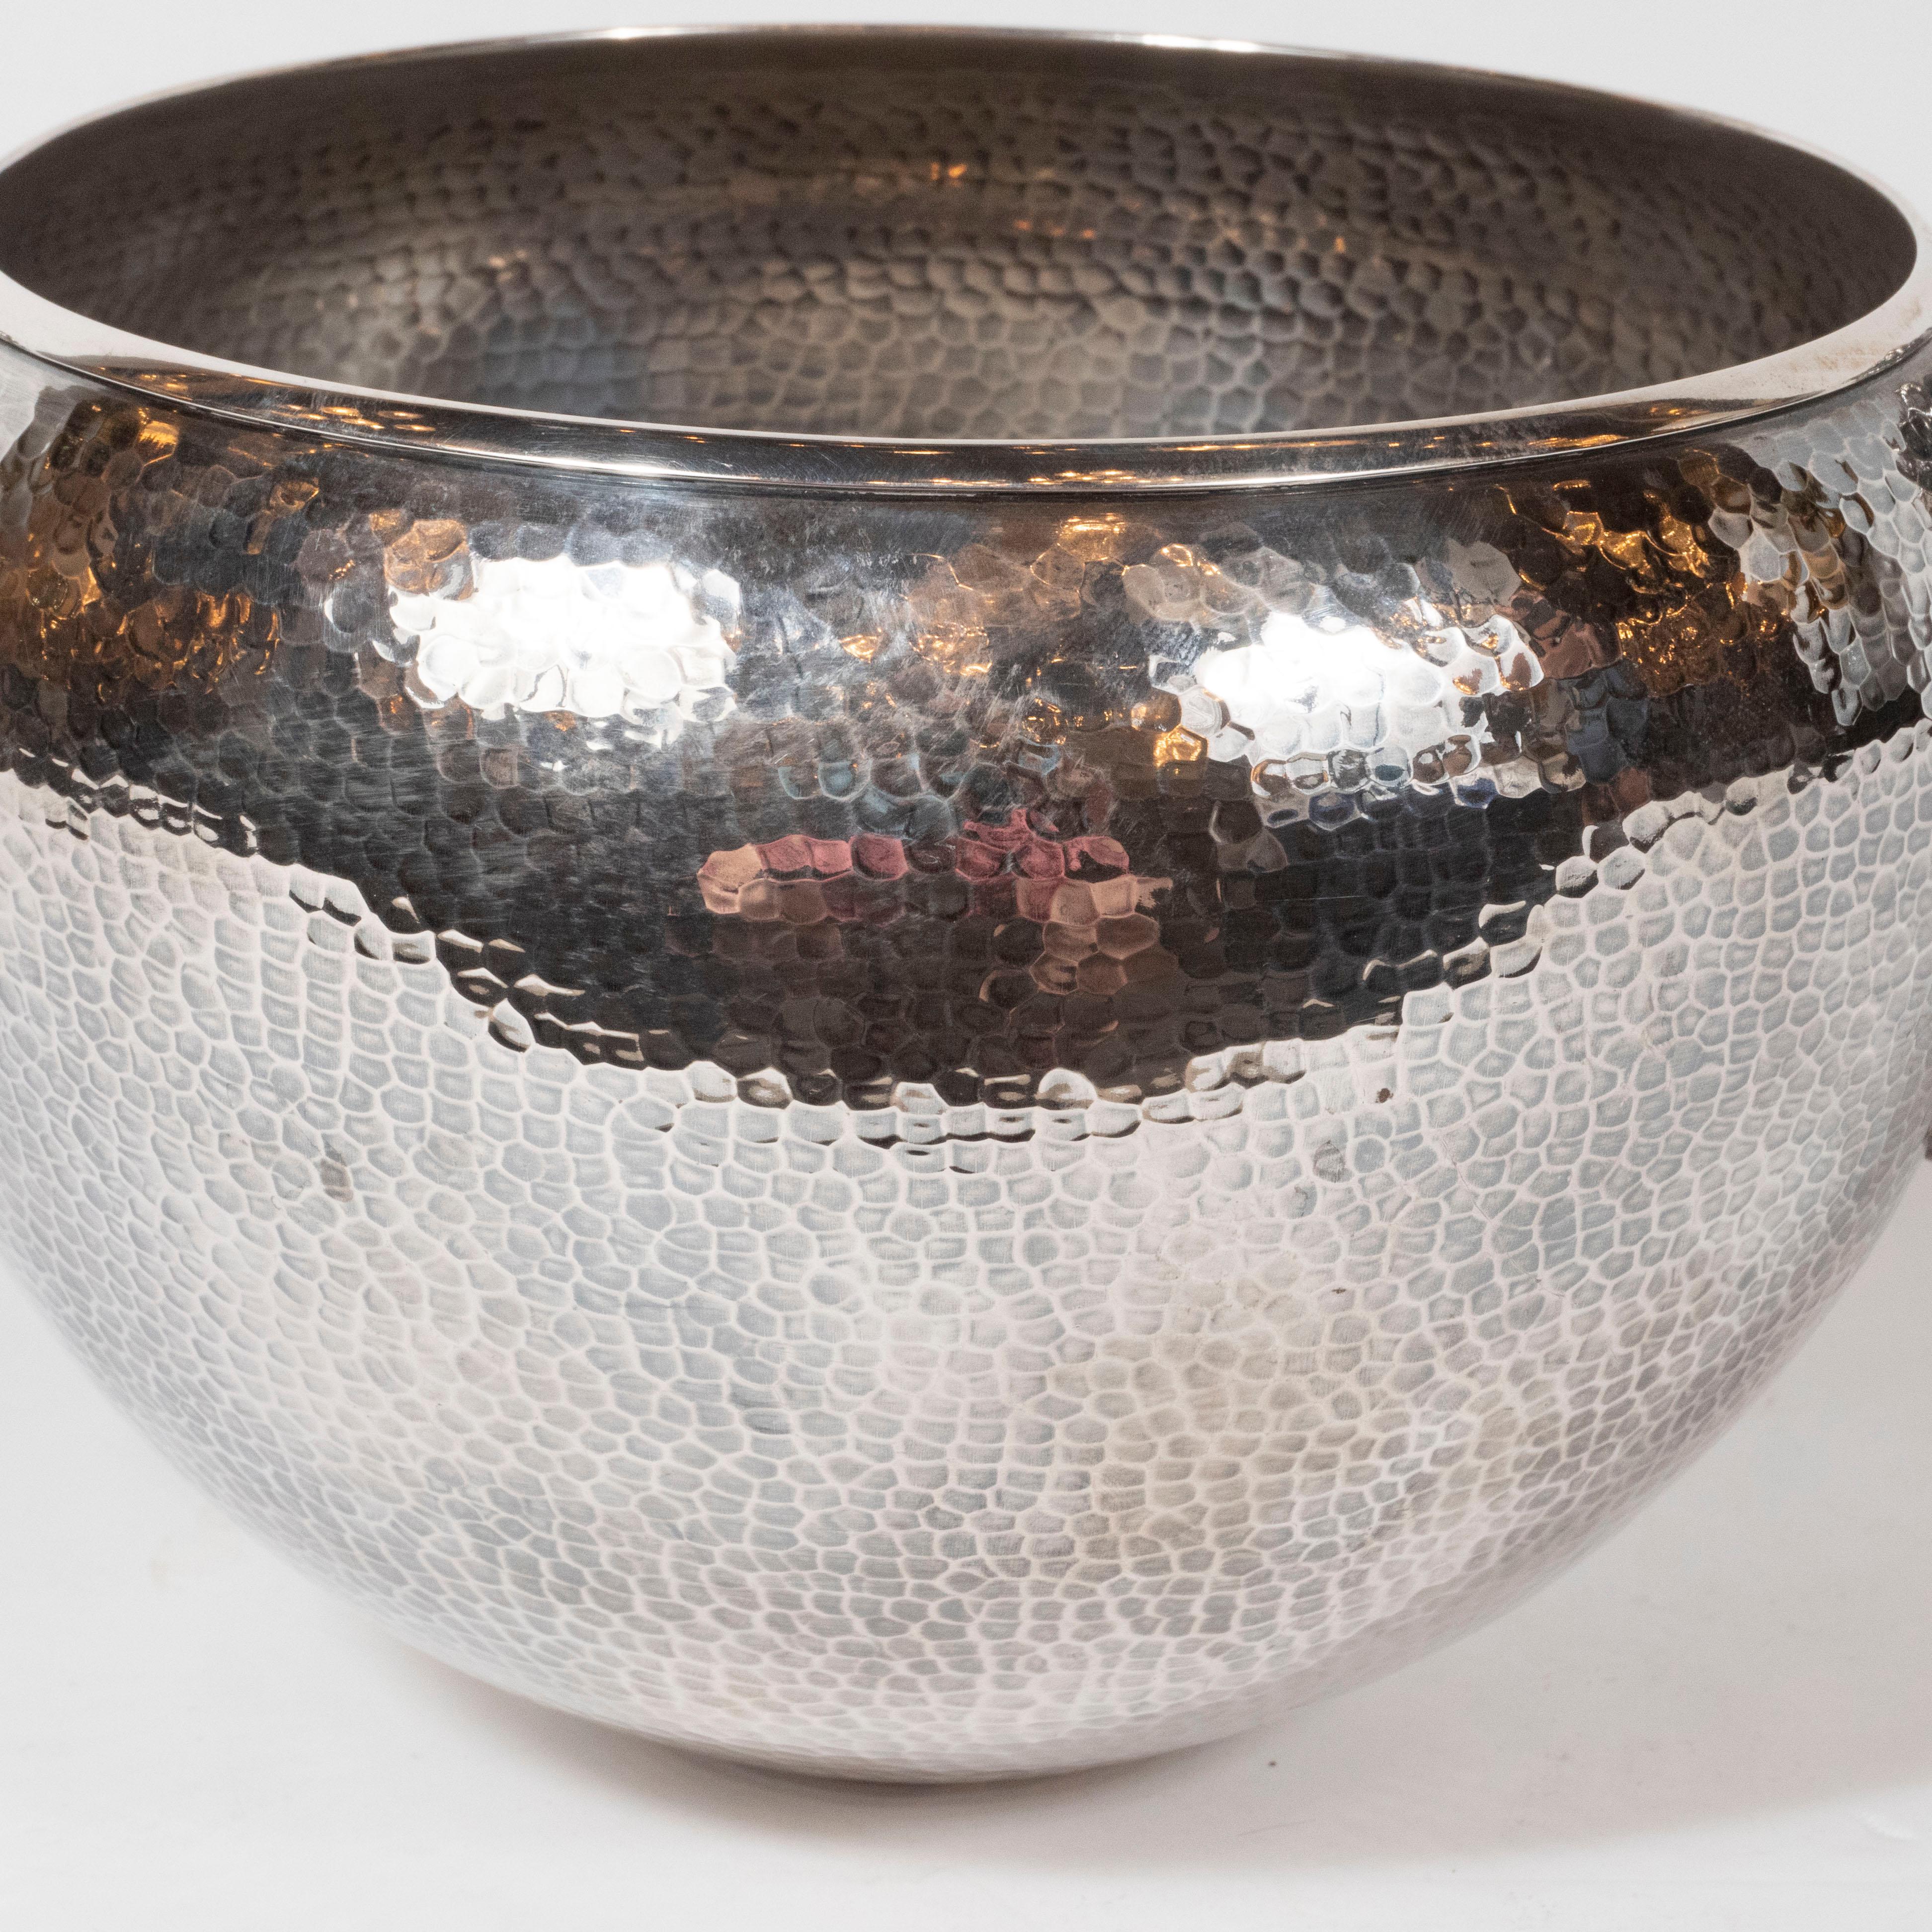 This sophisticated modernist bowl was realized in the United States. It features a spherical body with a circular mouth; a hand hammered dappled texture throughout; and two figurative male handles, inspired by Greek classicism that protrude from the